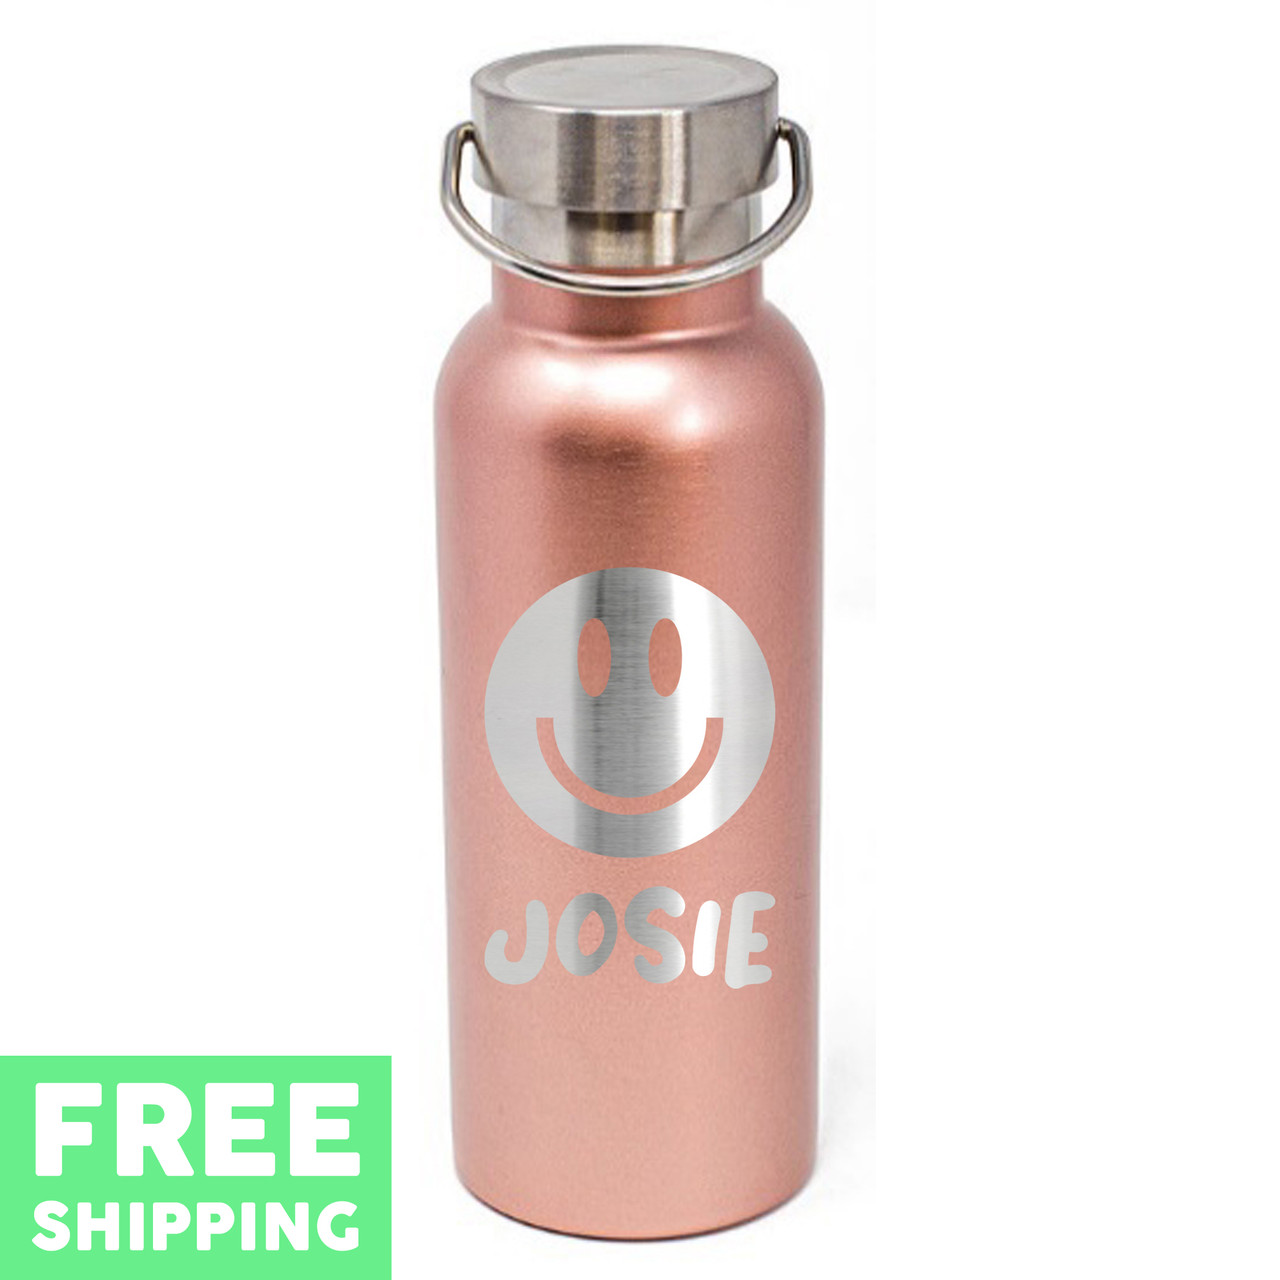 https://cdn11.bigcommerce.com/s-pza6oiin/images/stencil/1280x1280/products/10046/17729/customnamesmileyface_Caribe_17oz-Vacuum_Insulated_rosegold_3694_freeshipping__92765.1603047878.jpg?c=2?imbypass=on